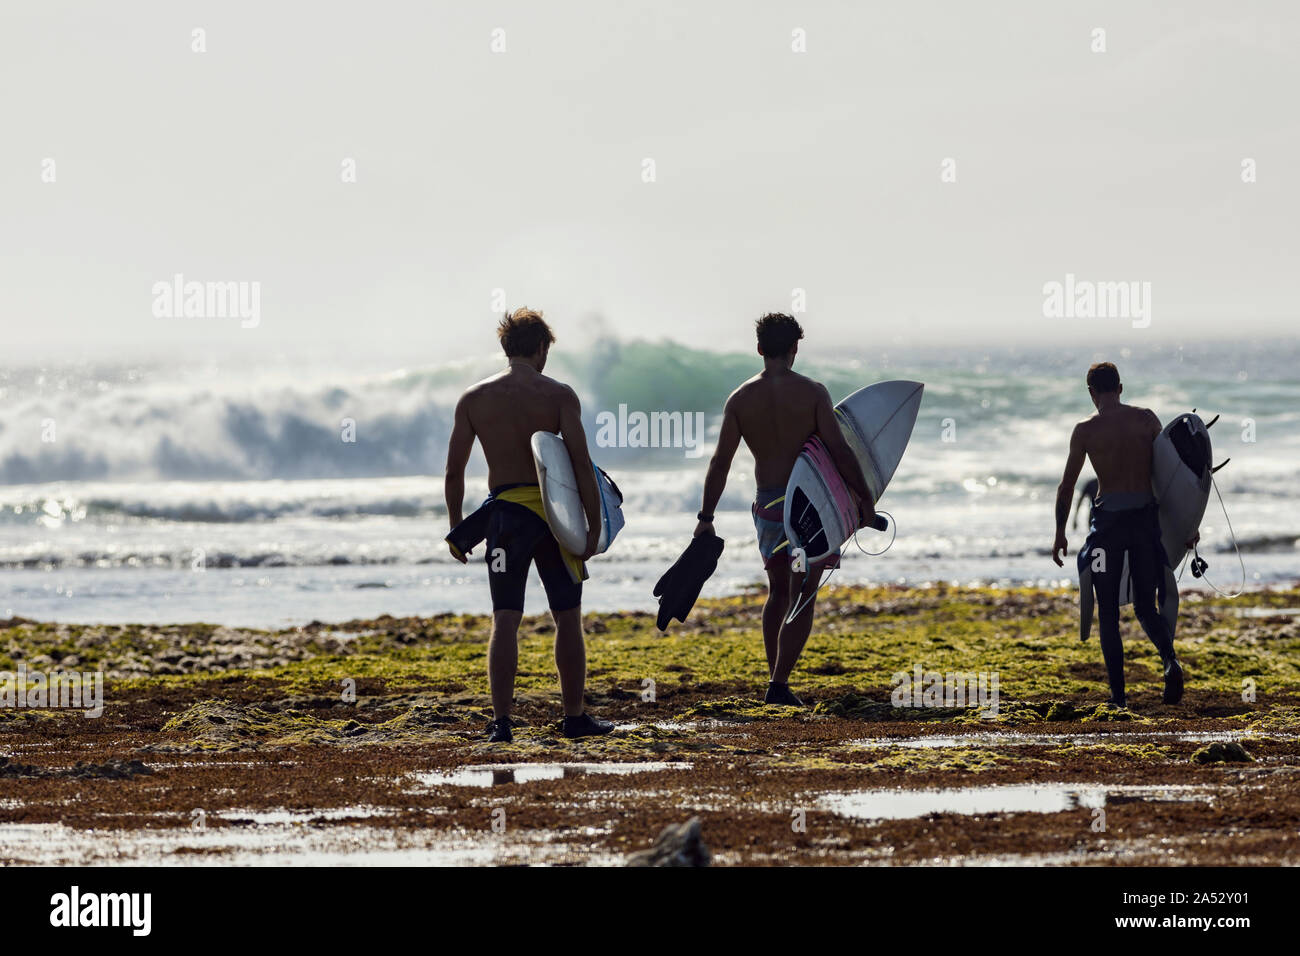 Group of men with surfboard walking on the beach Stock Photo